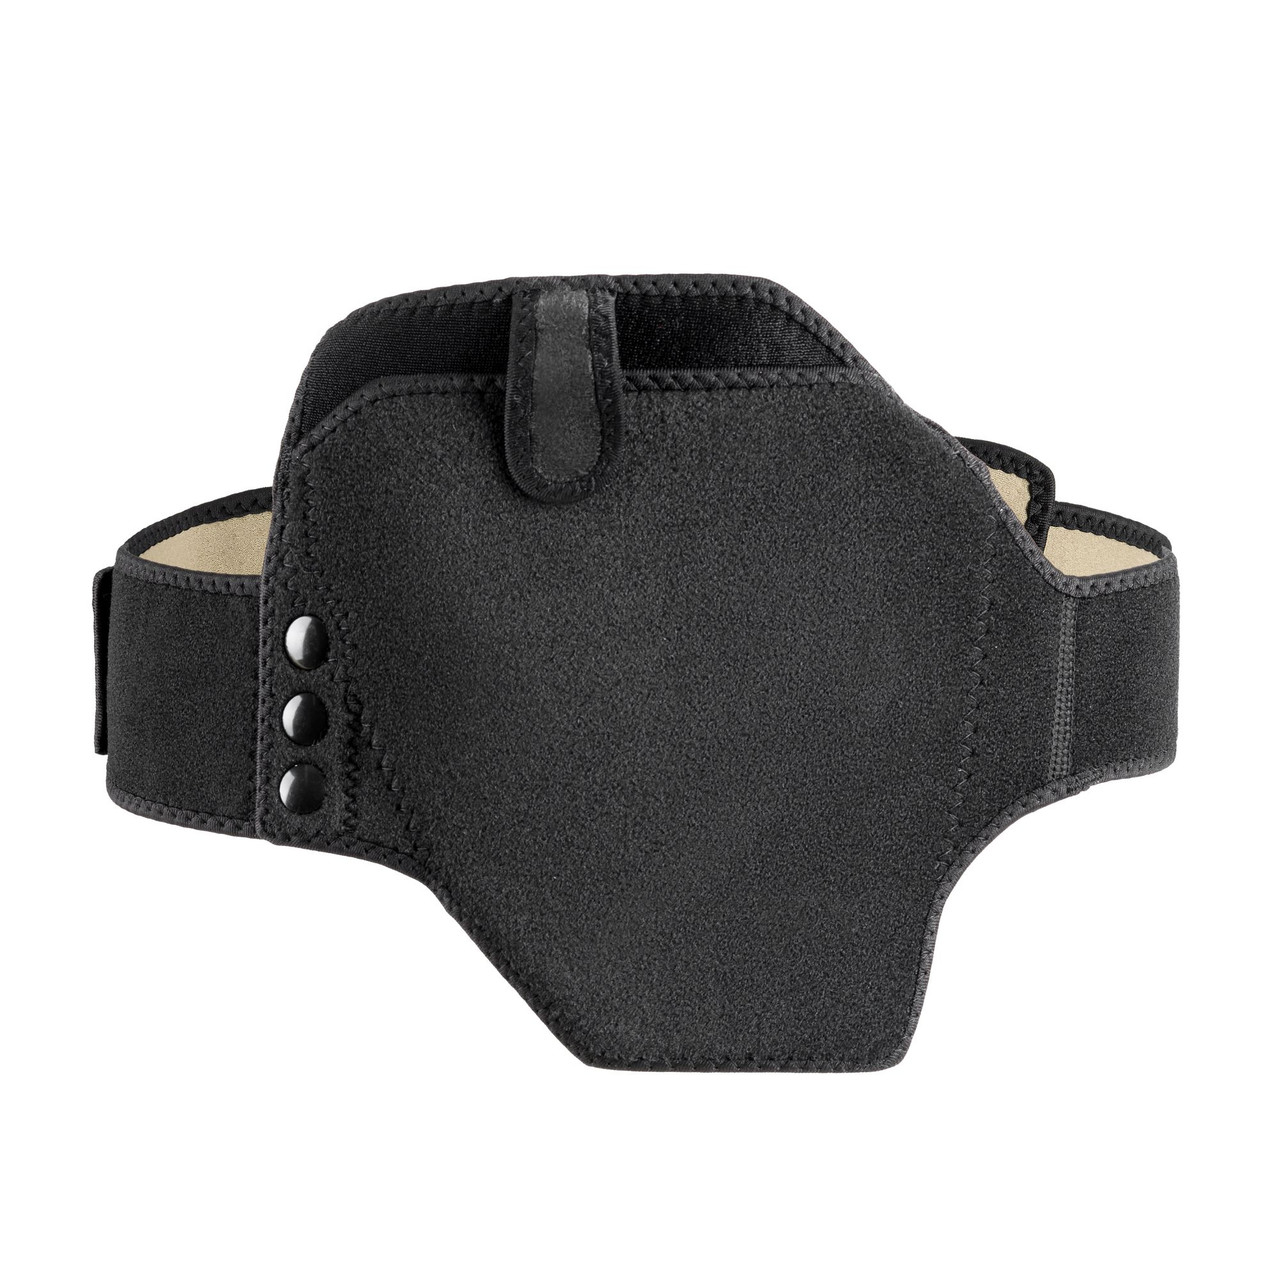 Ours Is a Purpose-Built Concealed Carry Holster for Women - Pistol Wear, LLC